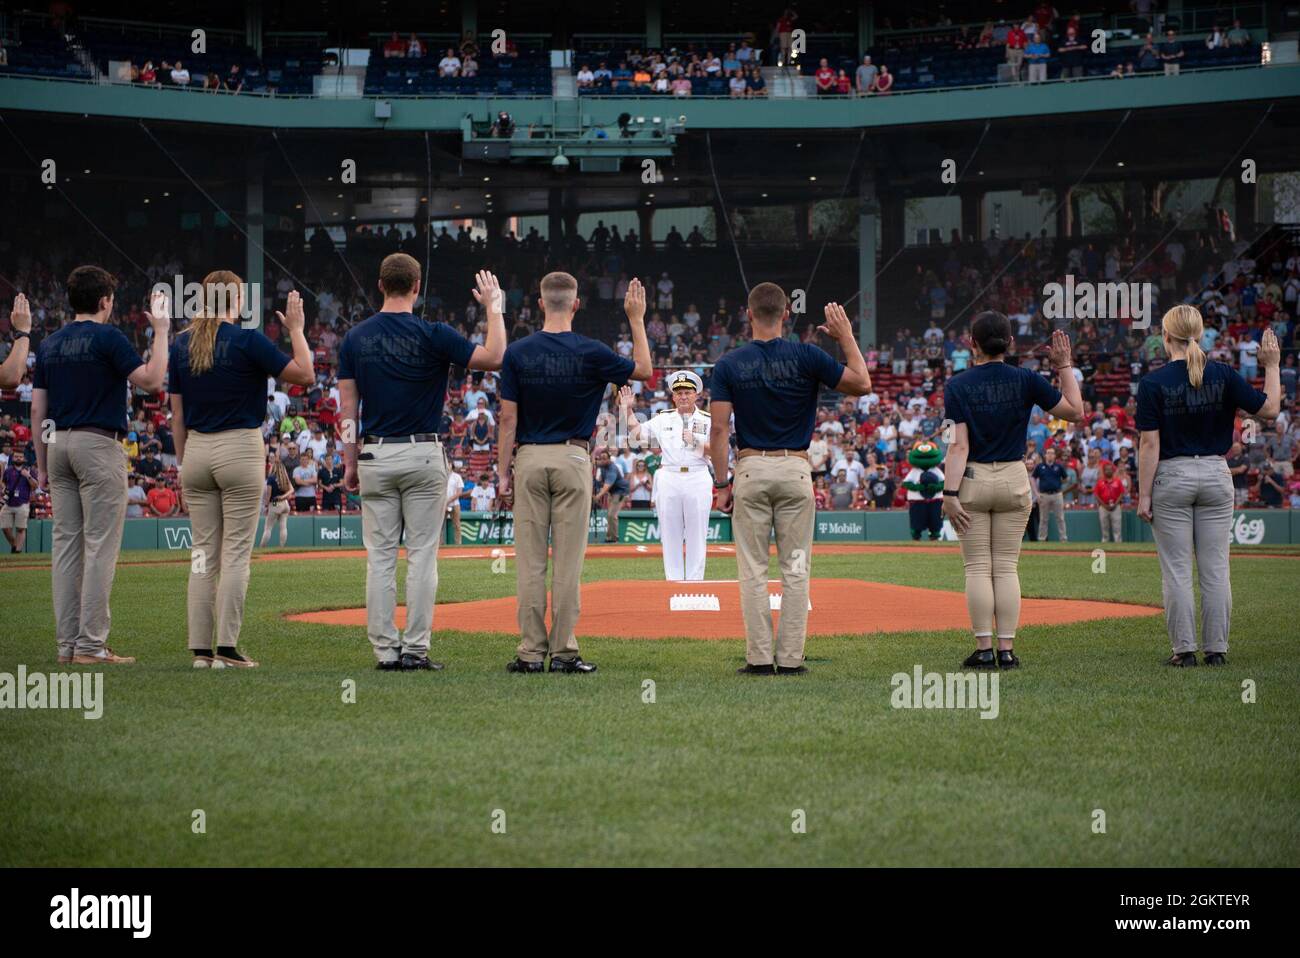 210629-N-BB269-1196 (June 30, 2021) Chief of Naval Operations Adm. Mike Gilday administers the oath of enlistment to future U.S. Navy Sailors prior to a Red Sox baseball game at Fenway Park, Boston. The celebration of military service included Strike Fighter Squadron 213 (VFA-213) the Blacklions conducted a fly over, a Navy Band D.C. vocalist sang the national anthem, and the USS Constitution color guard paraded the colors in front of the audience. Stock Photo